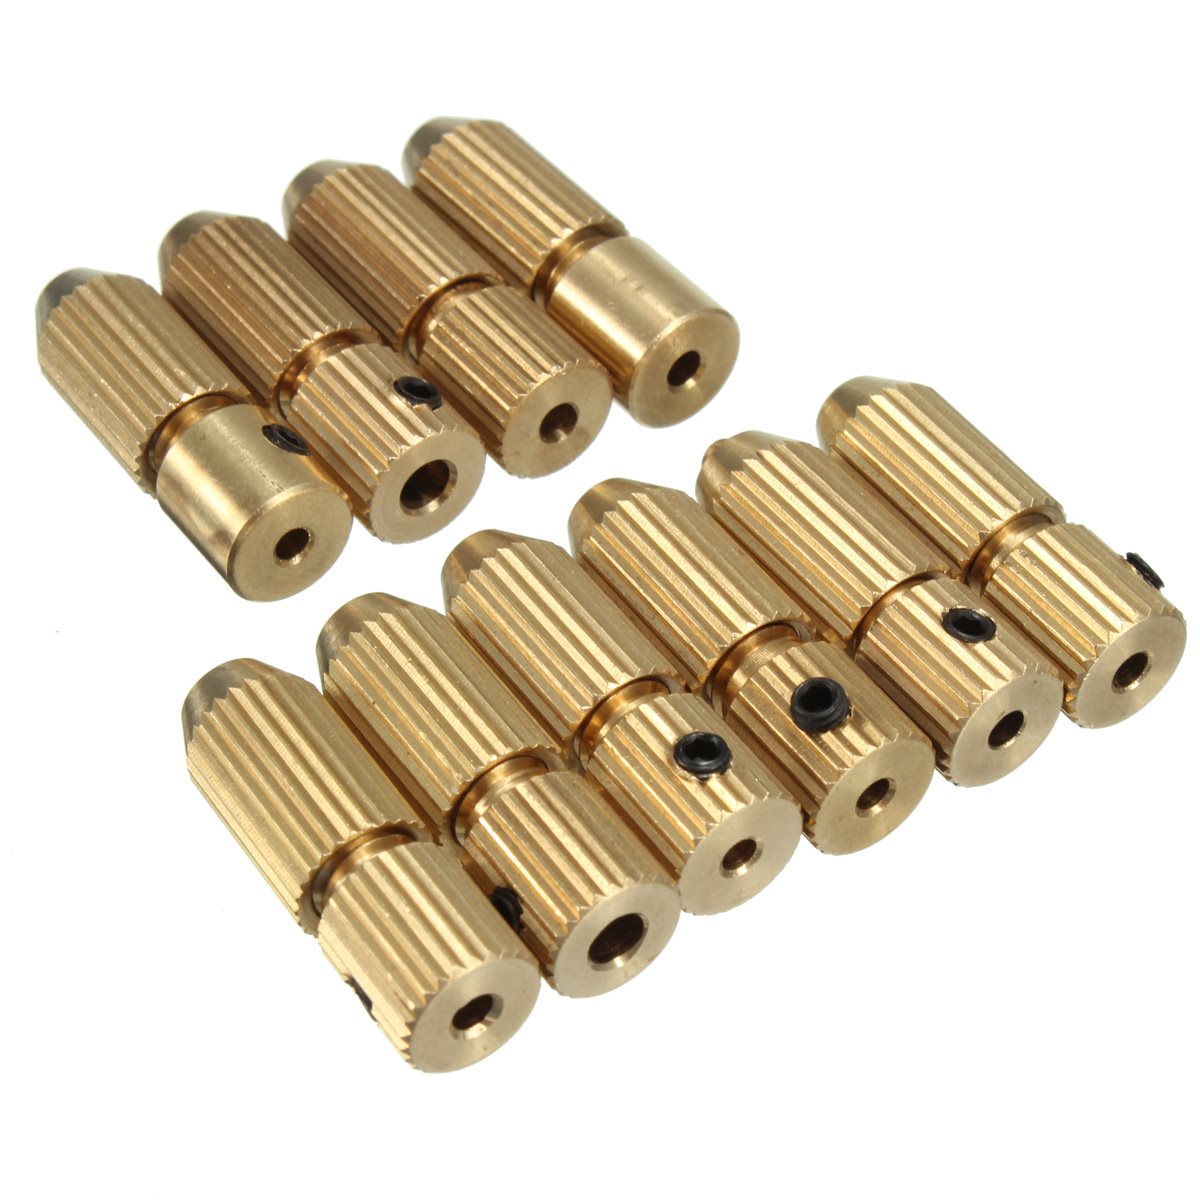 2 3mm Brass Electric Motor Shaft Clamp Fixture Chuck Mini Small For 0 7mm 3 2mm